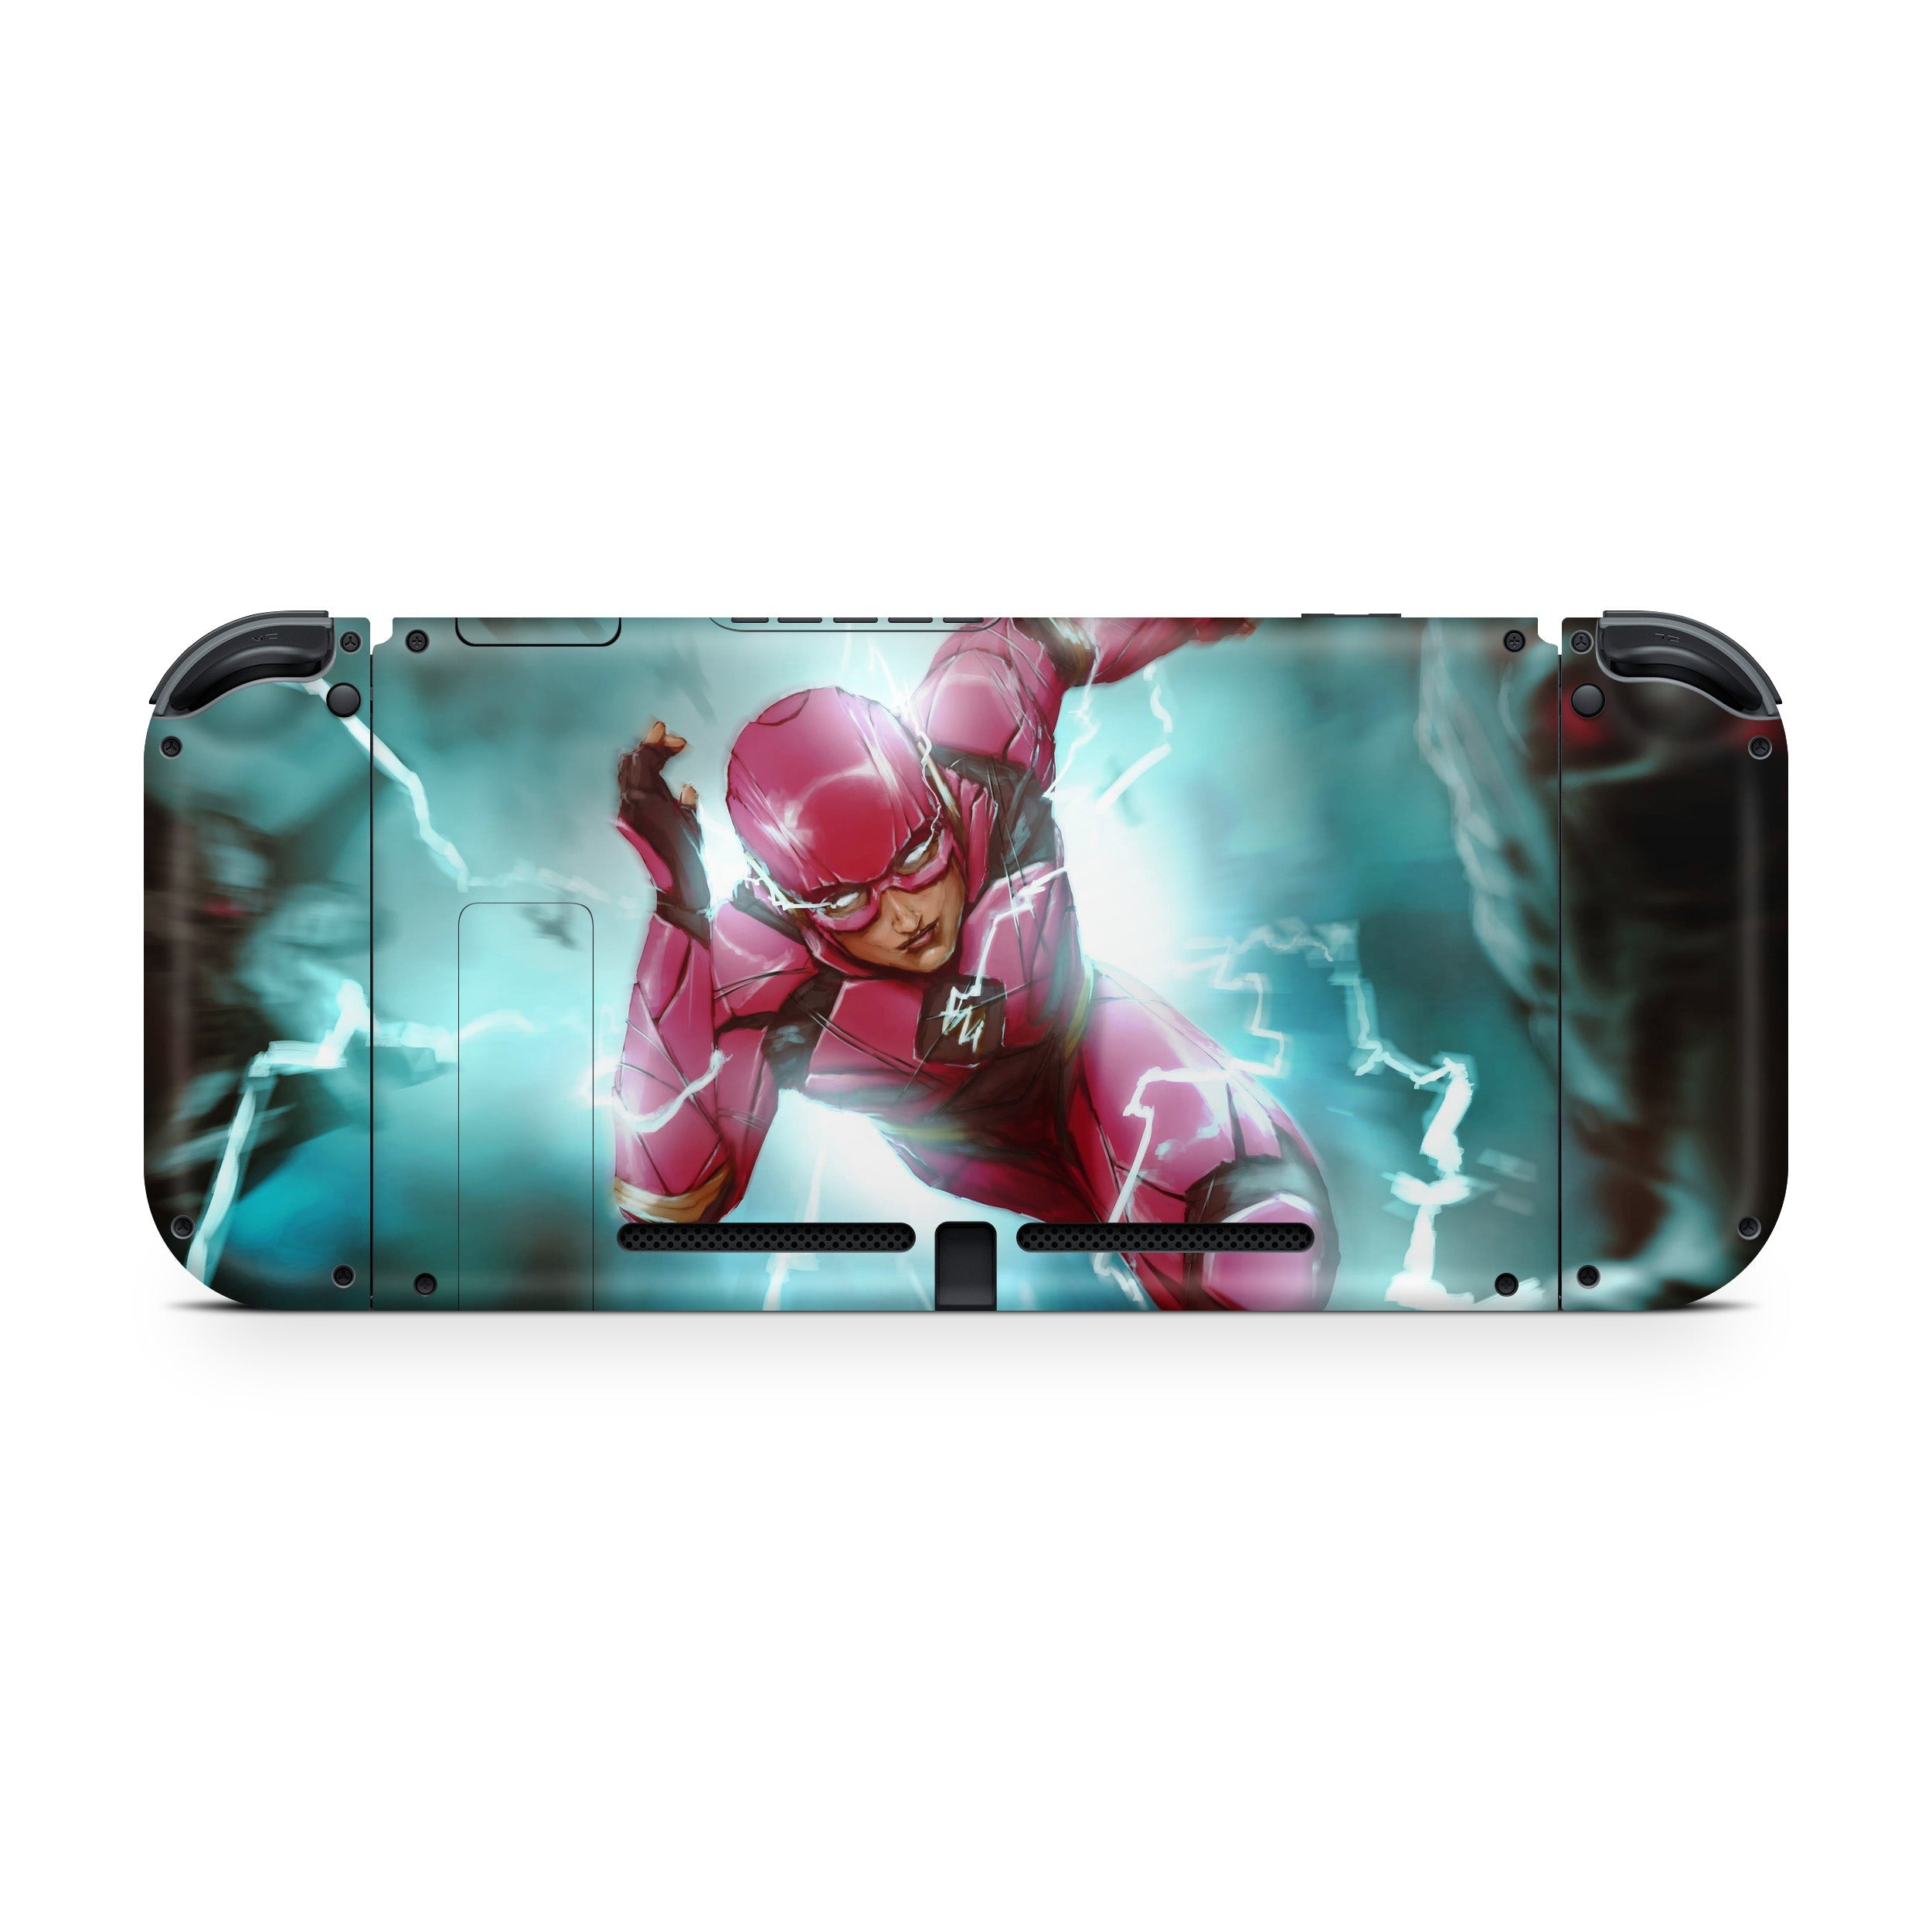 A video game skin featuring a Marvel Flash design for the Nintendo Switch.